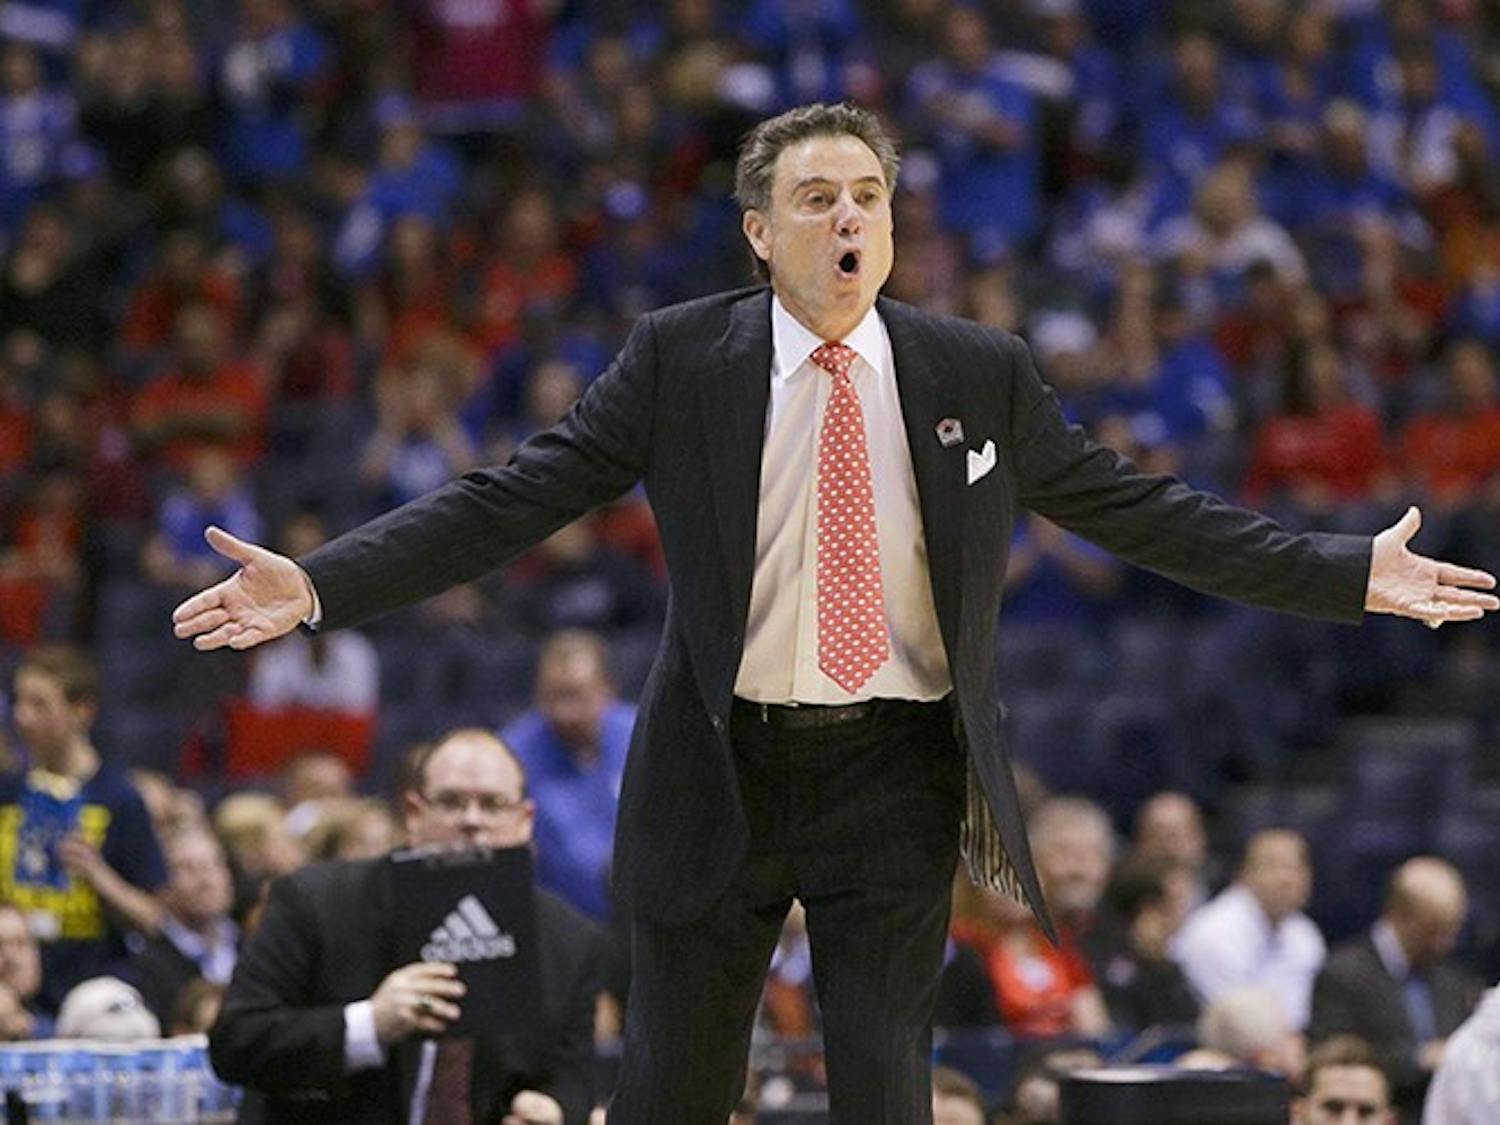 Louisville head coach Rick Pitino questions a call during action against Kentucky in the NCAA Tournament&apos;s Midwest Region semifinal at Lucas Oil Stadium in Indianapolis on Friday, March 28, 2014. (Mark Cornelison/Lexington Herald-Leader/MCT)